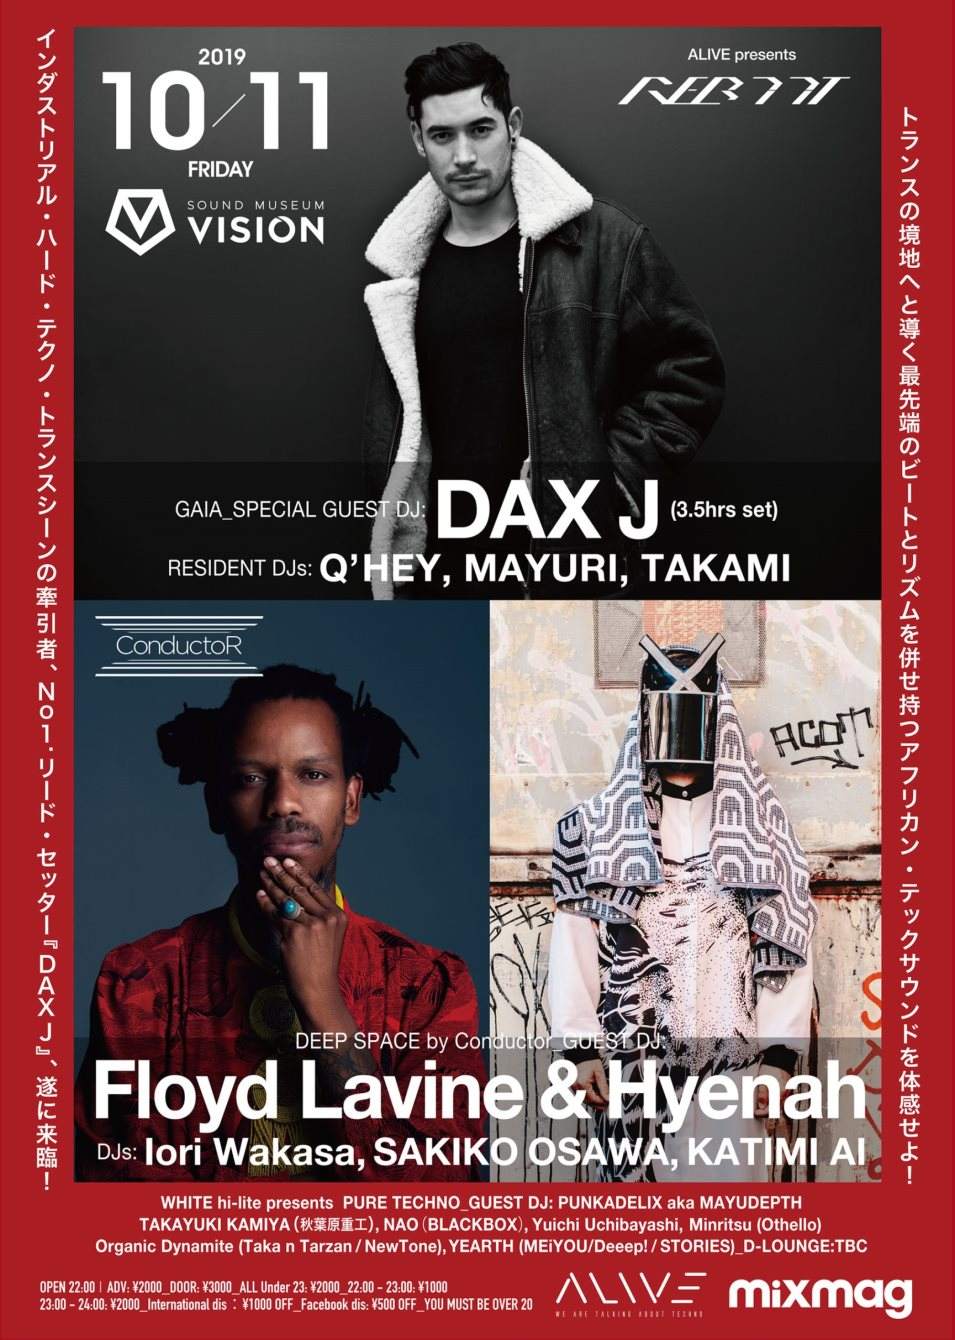 Alive presents Reboot Feat. DAX J & Conductor Feat. Floyd Lavine & Hyenah - フライヤー表